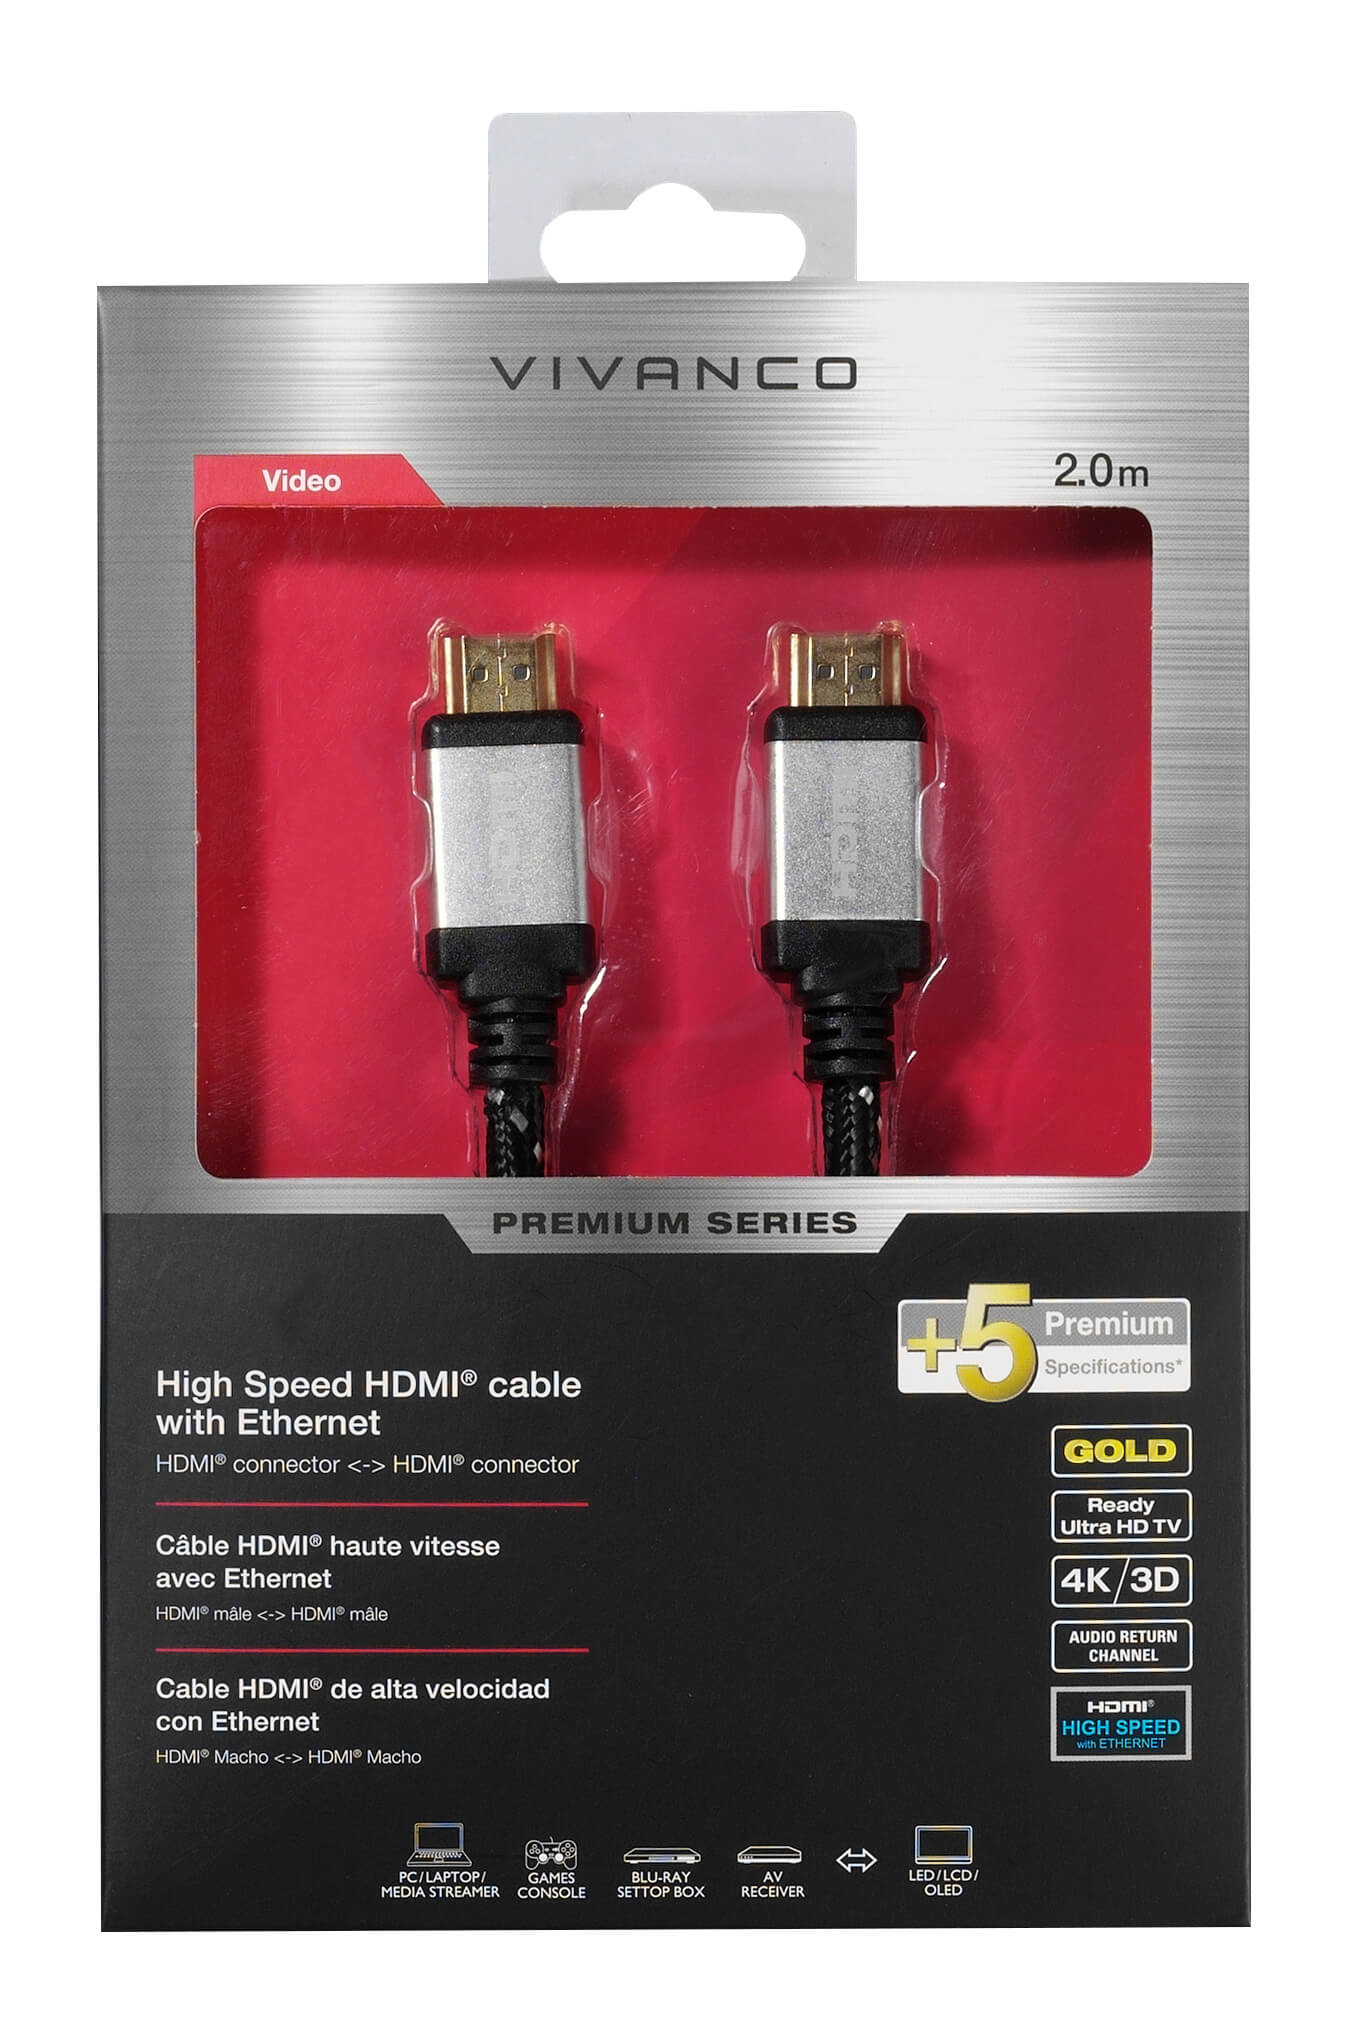 Premium High Speed HDMI® cable with Ethernet, 2m - Vivanco